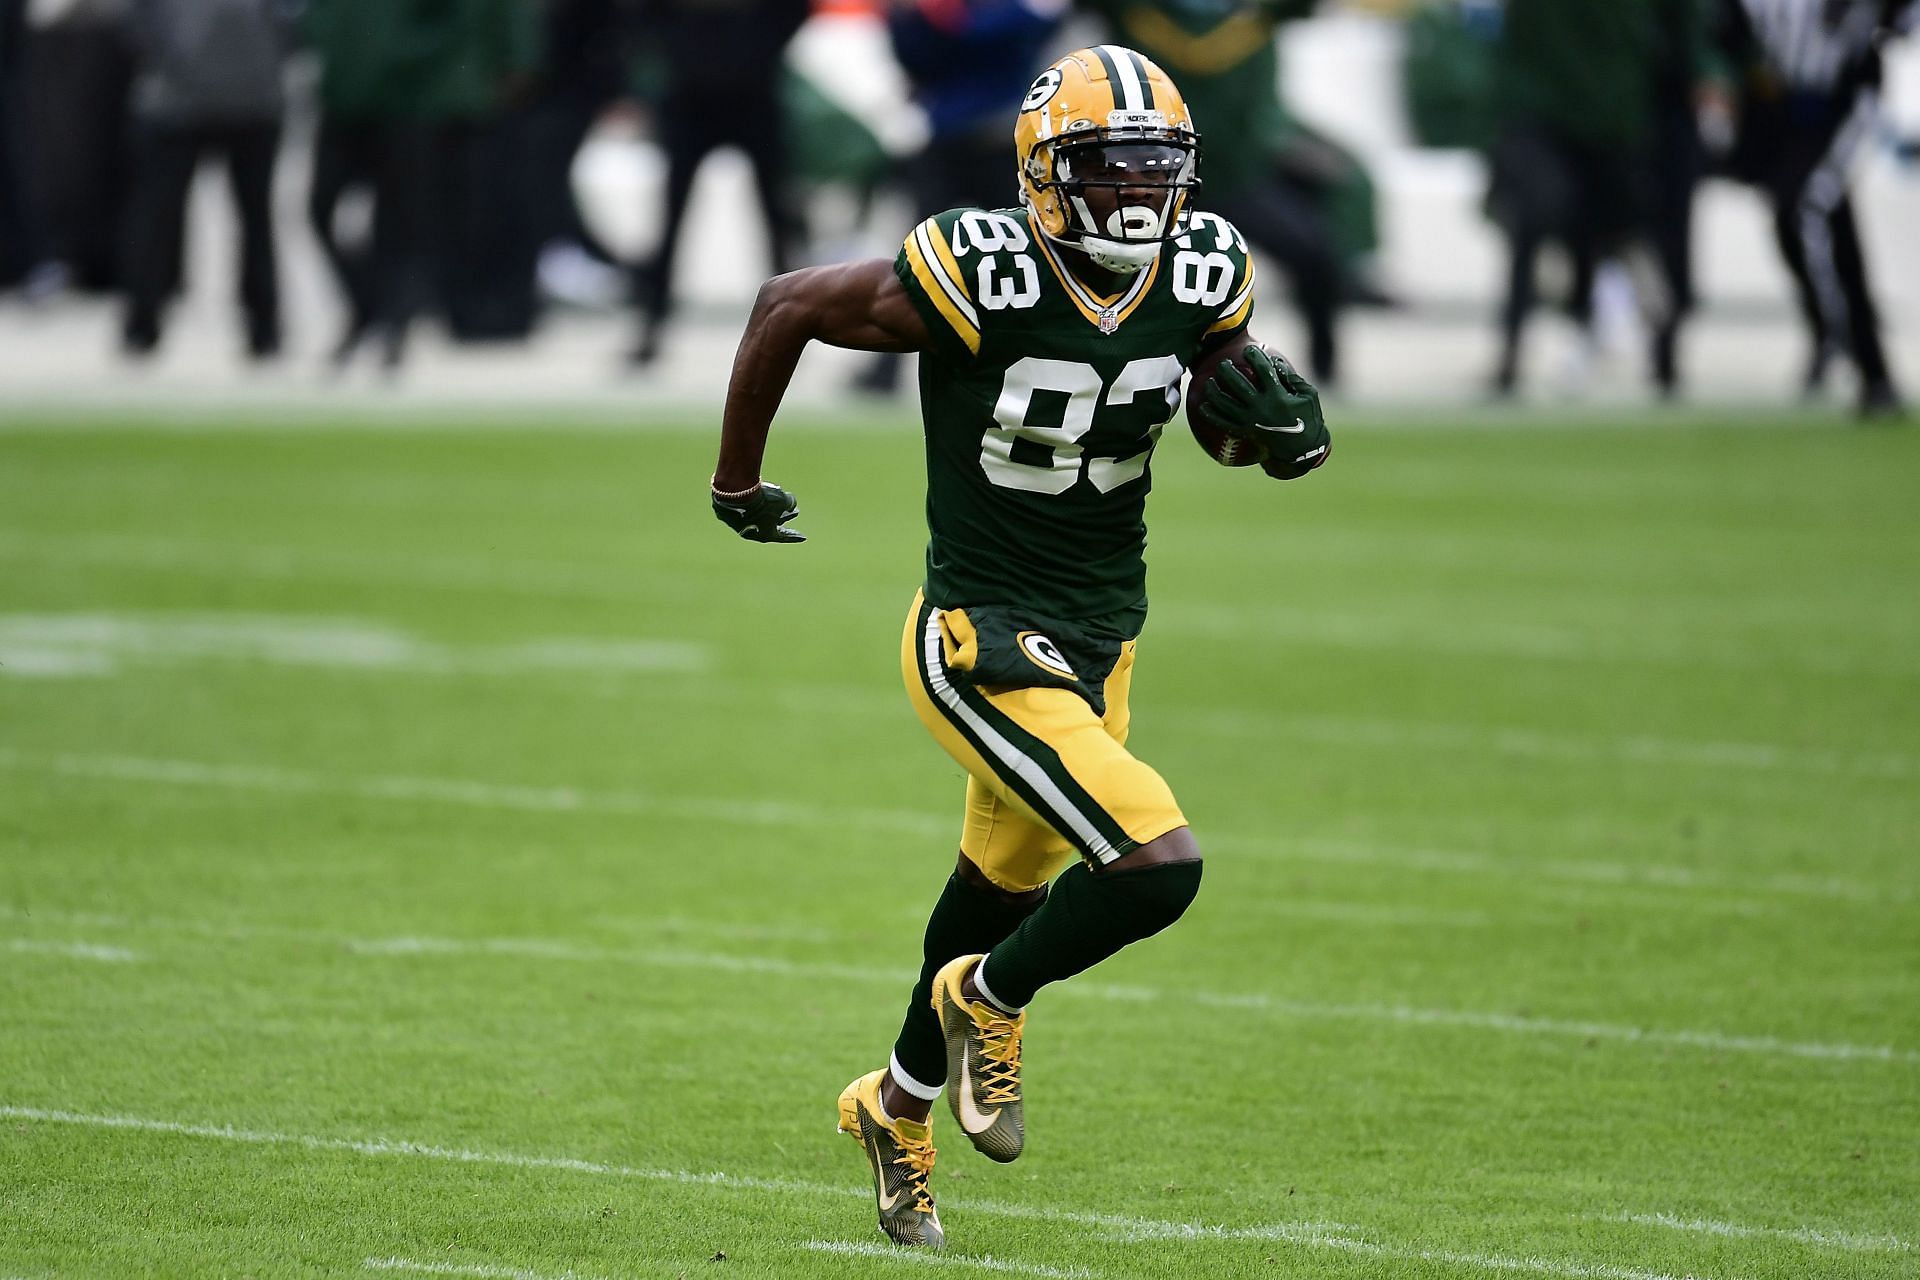 Green Bay Packers wide receiver Marquez Valdes-Scantling